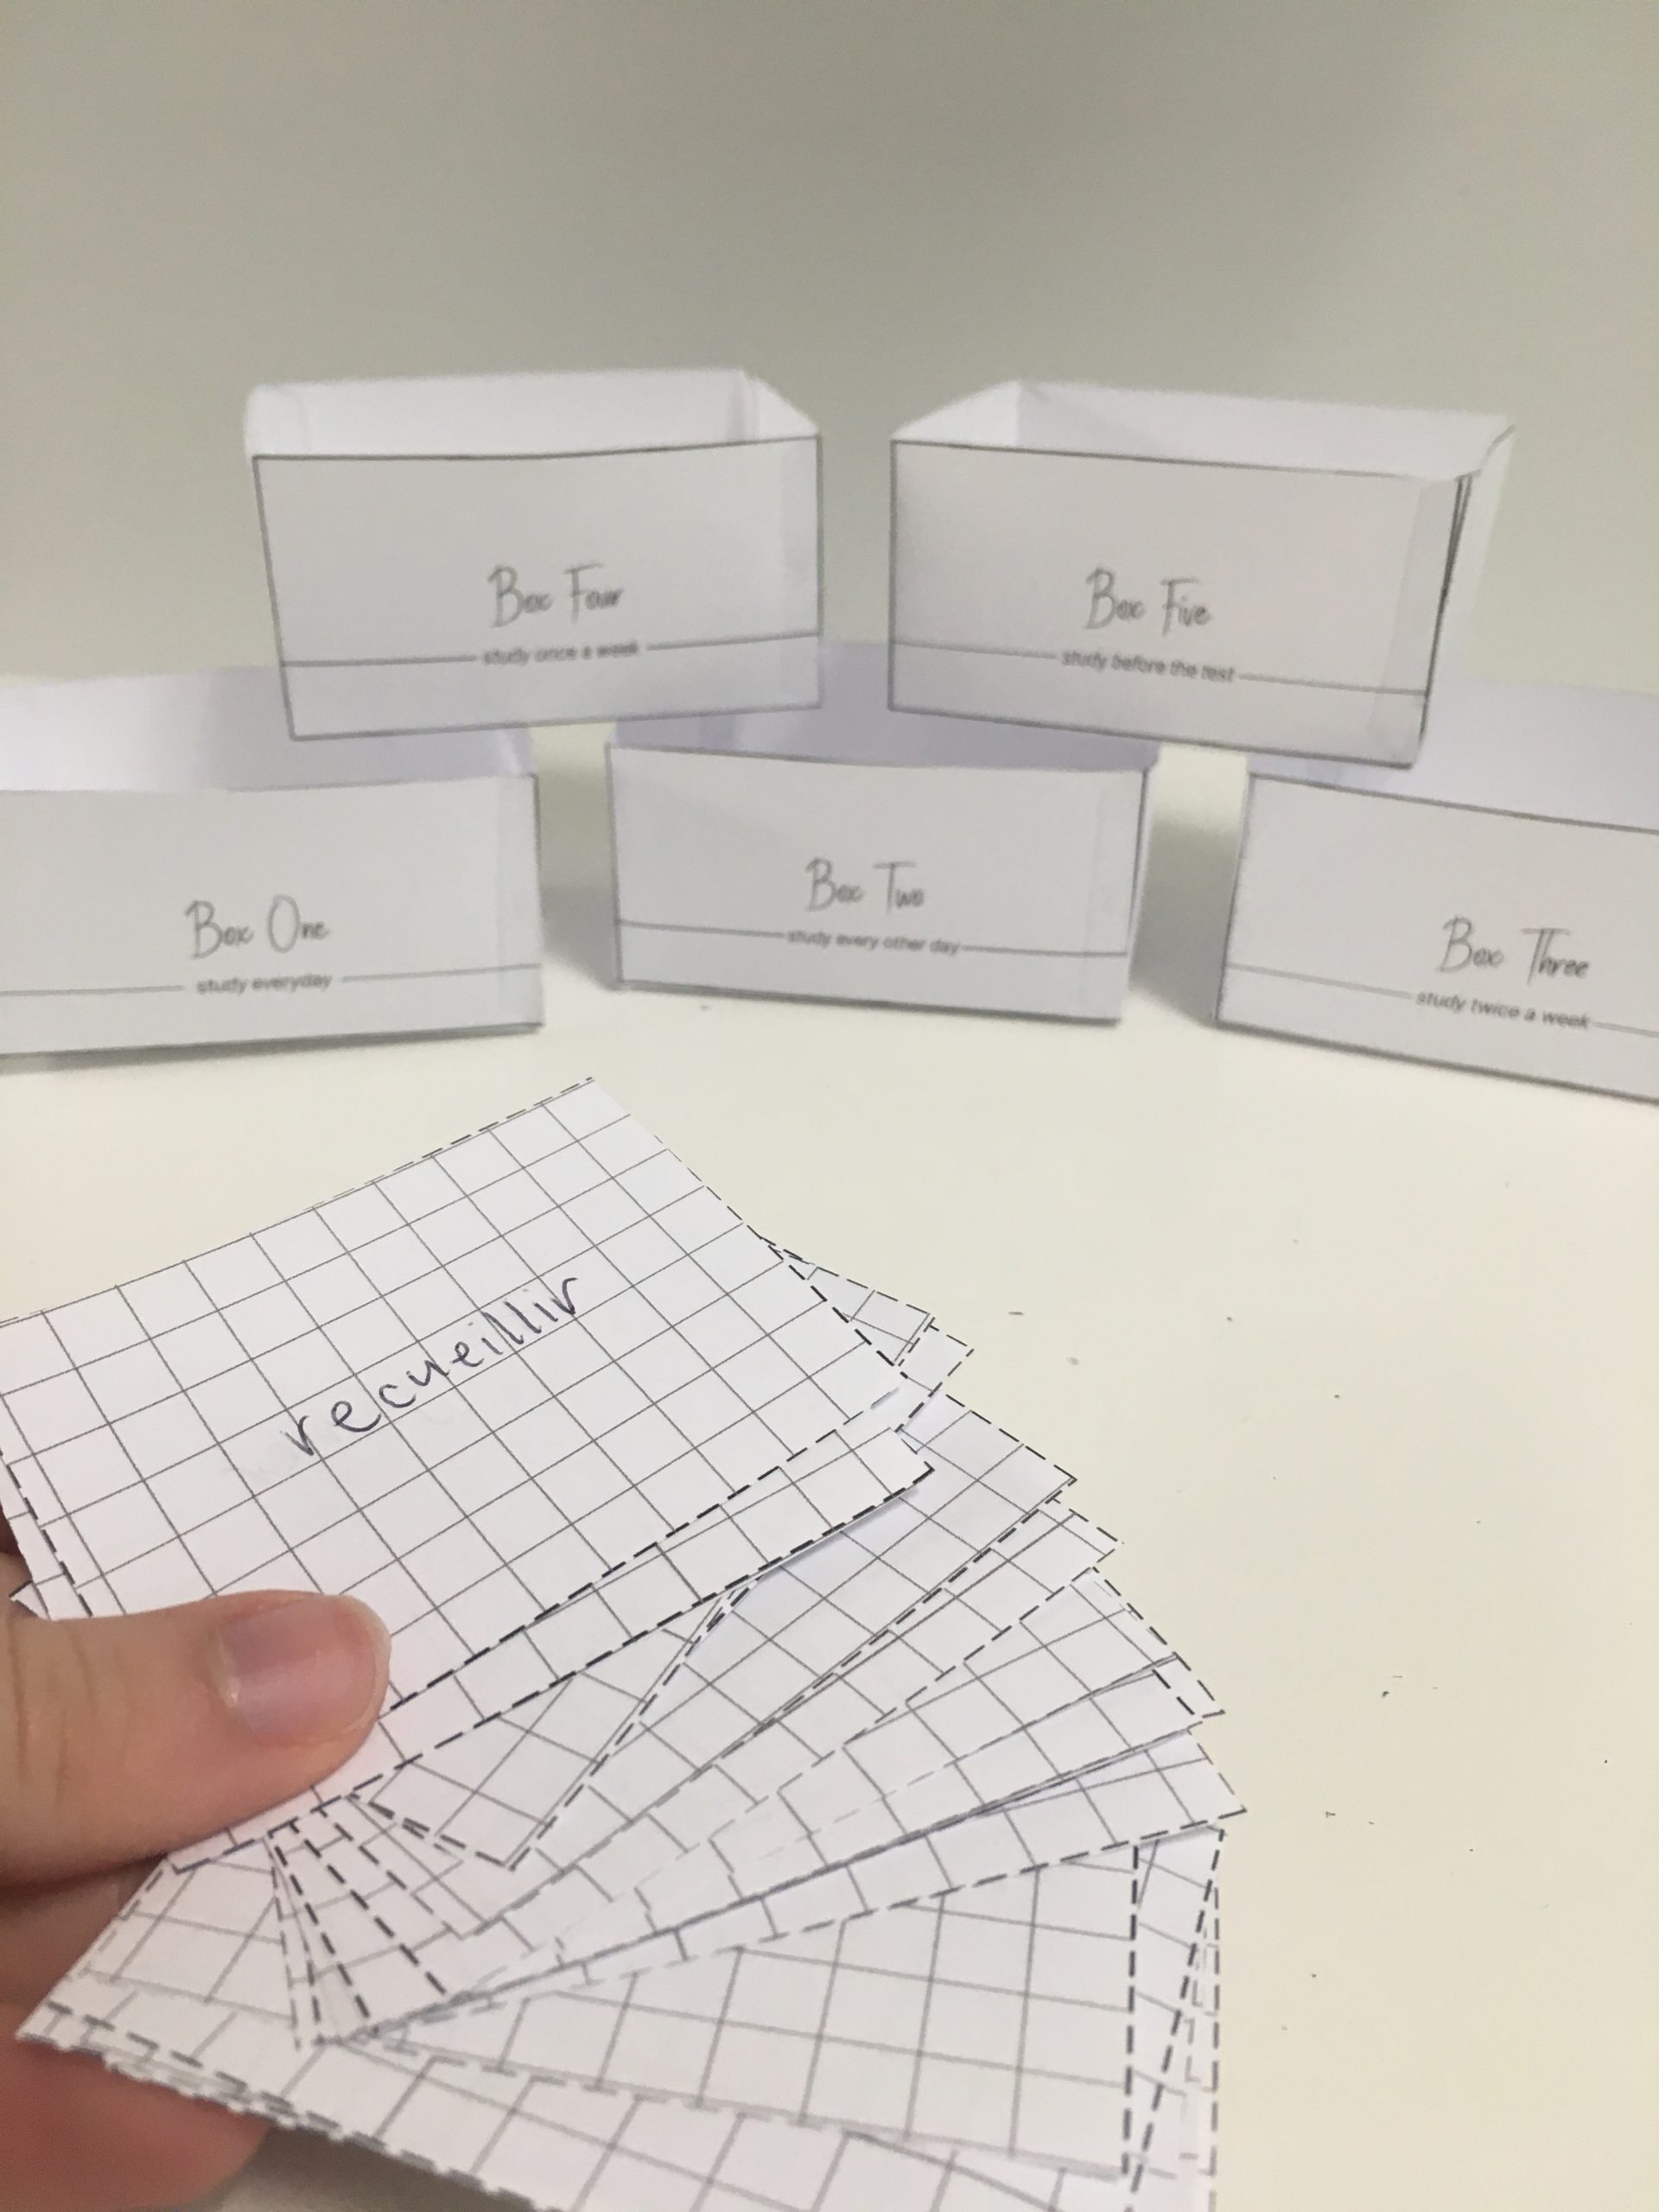 How To Study Flashcards With The Leitner Method - StudyStuff